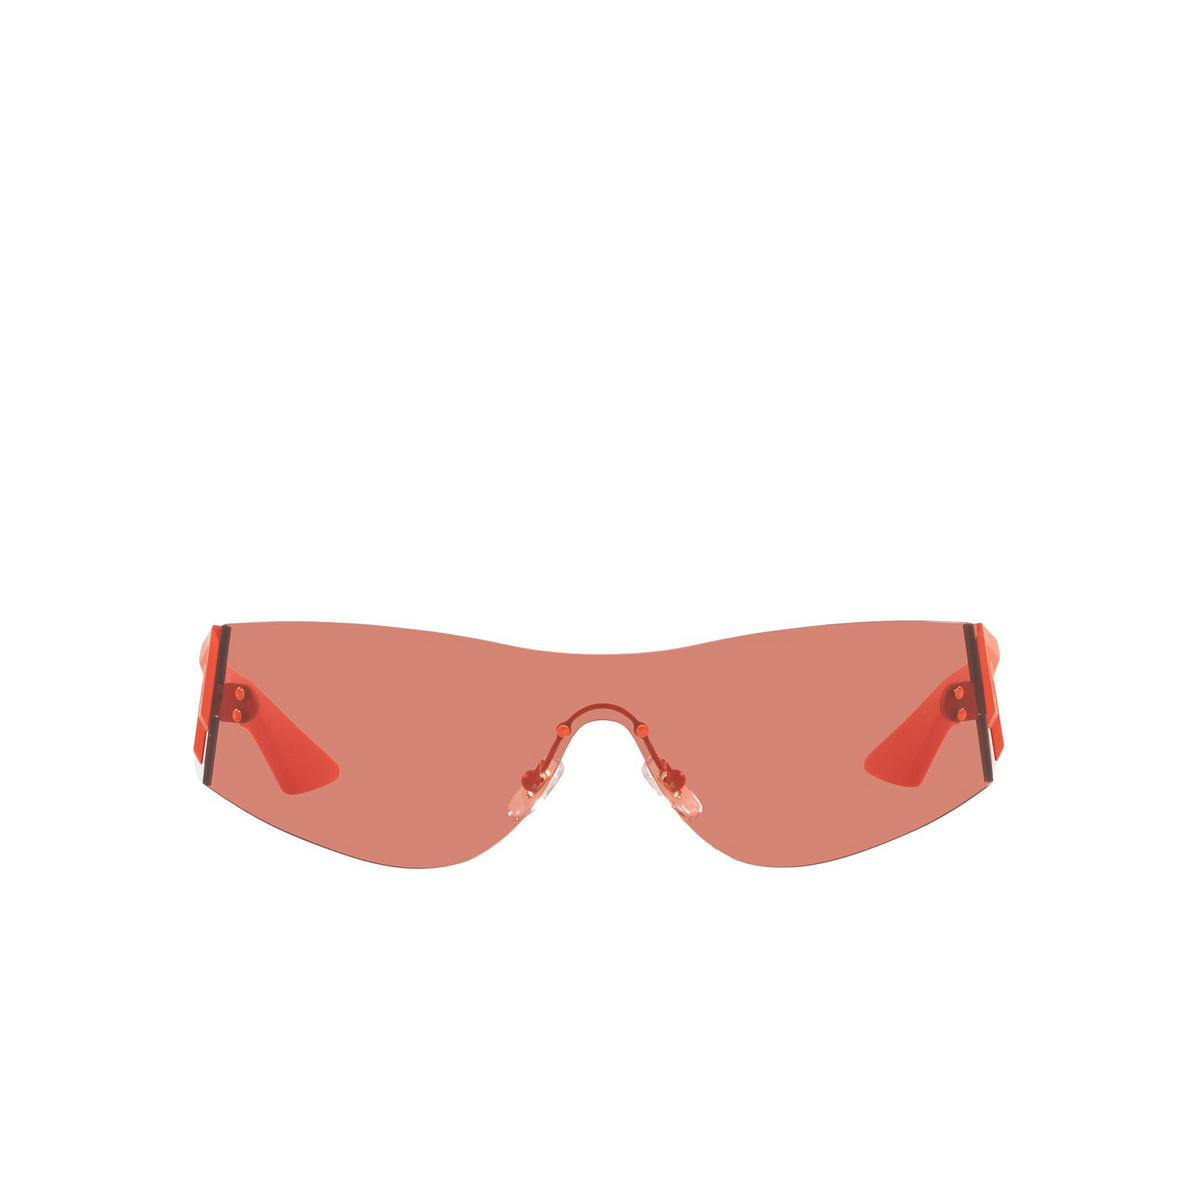 Versace® Irregular Sunglasses: VE2241 color Red 147884 - front view.